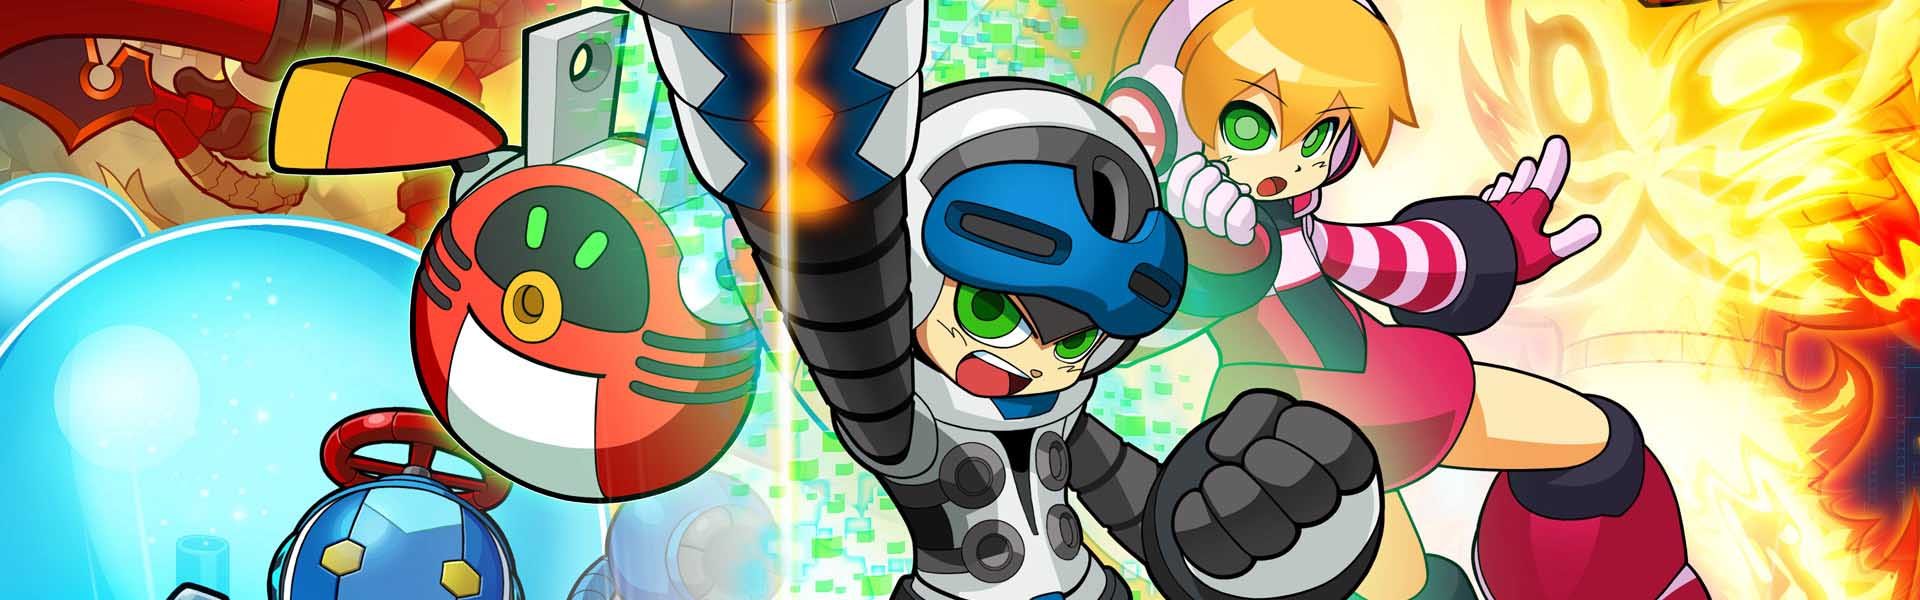 mighty no 9 ps3 download free